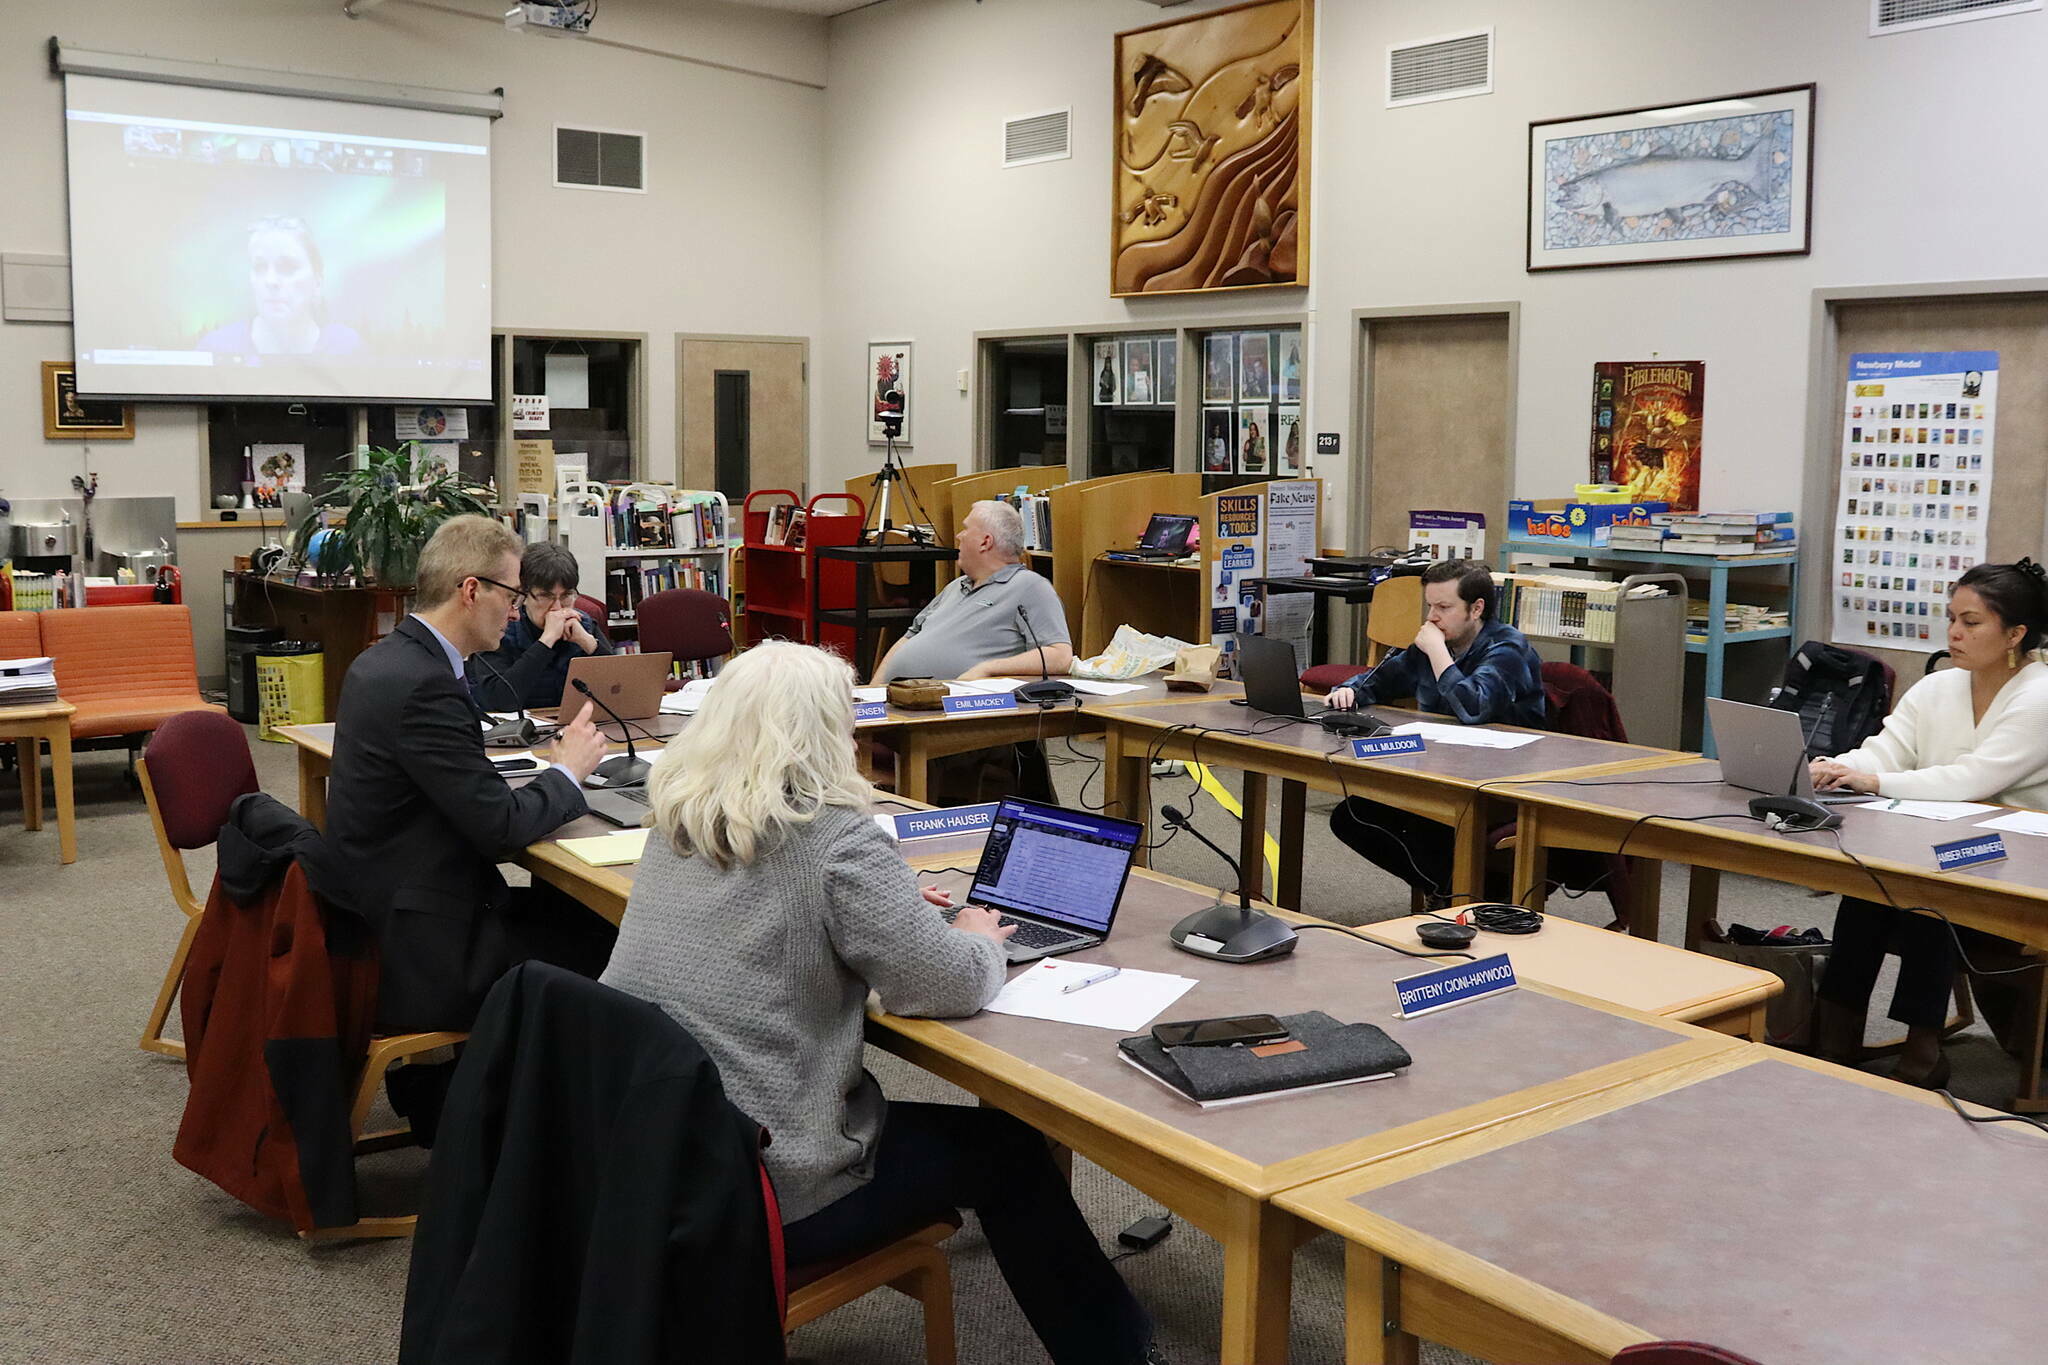 Juneau School District administrators and board members listen to a remote presentation Jan. 9 by Lisa Pearce, hired as a budget expert in December, about how her analysis during the previous few weeks revealed a $9.5 million deficit facing the district this fiscal year. The amount has since been revised to $8 million. (Mark Sabbatini / Juneau Empire file photo)